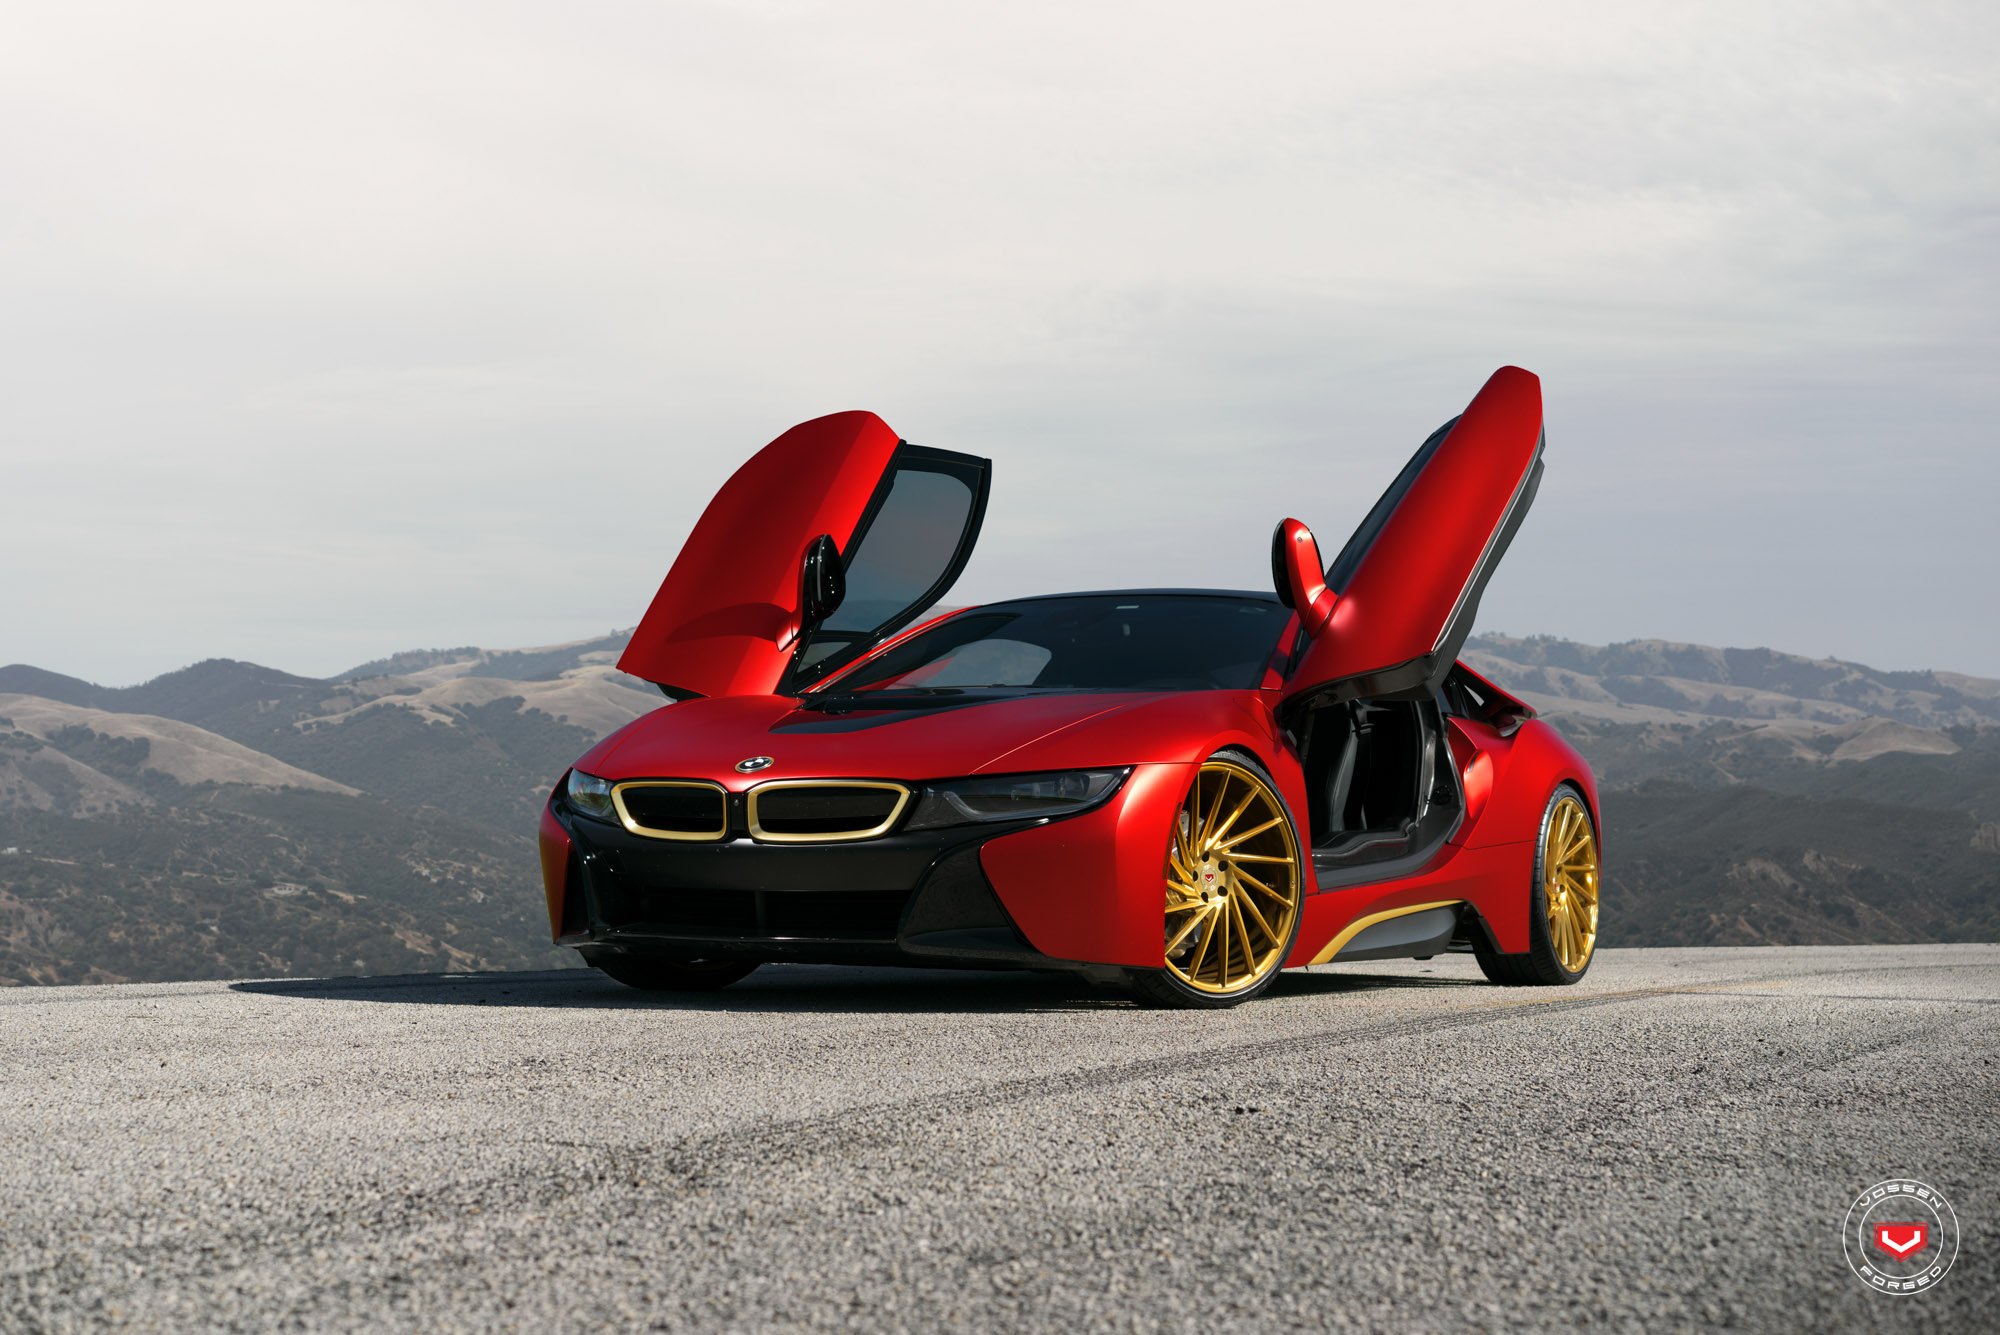 Red Godess - Beautiful Bmw i8 with Gold Accents - Photo by Vossen